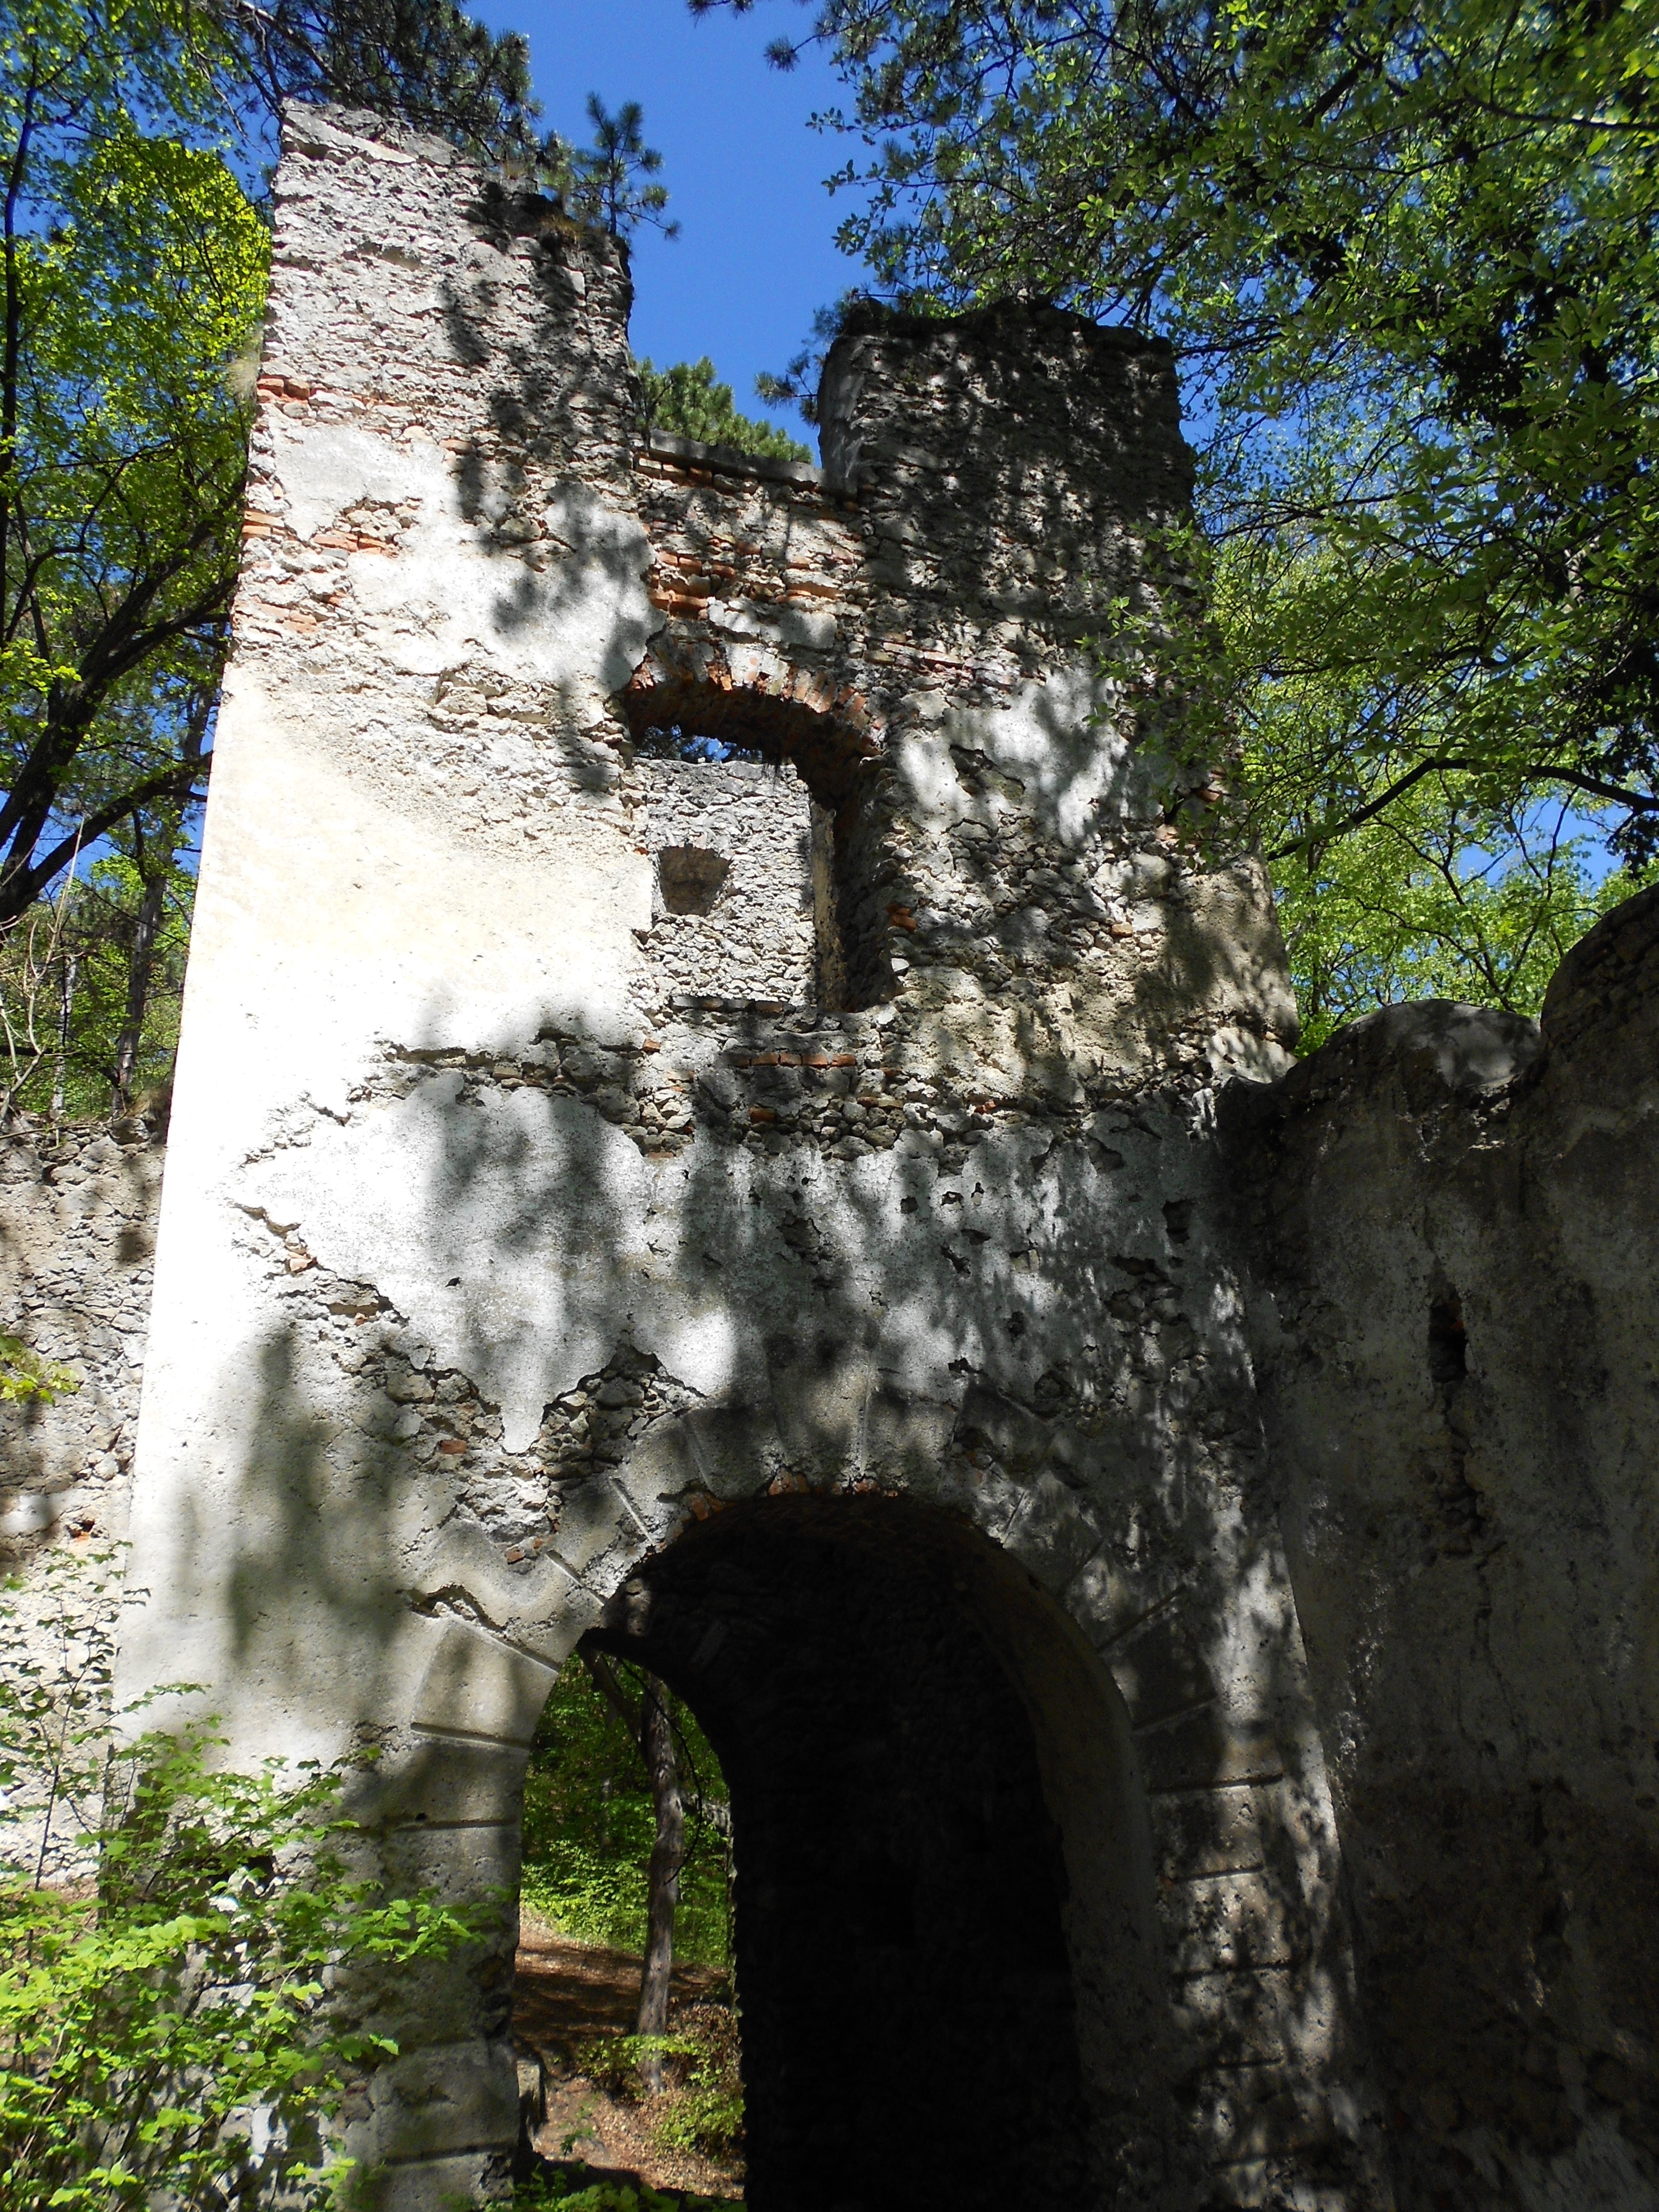 Tower, Castle, Fortress, Ruin, tree, day